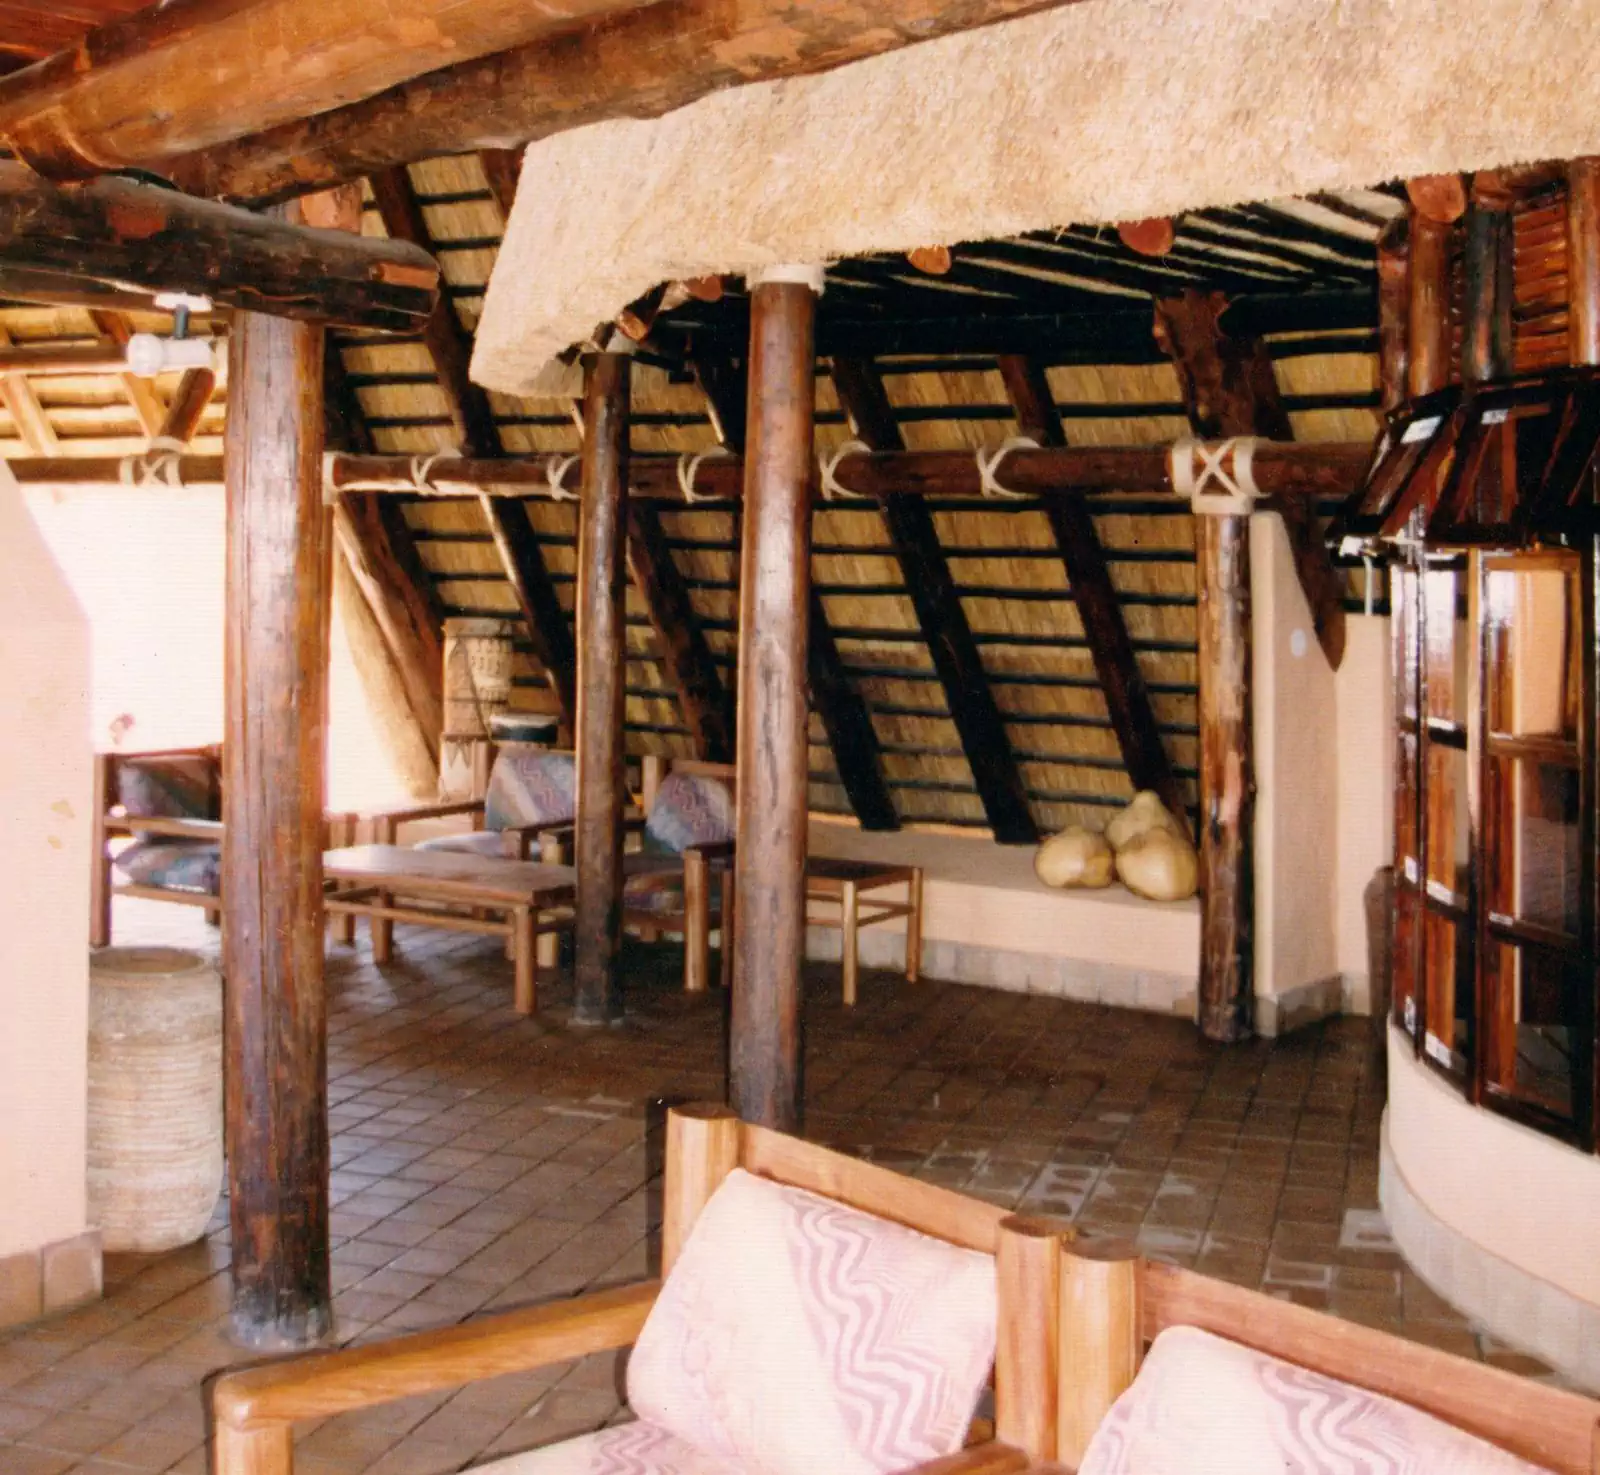 Large thatched roof entrance with engraved elephant lodge in Zimbabwe